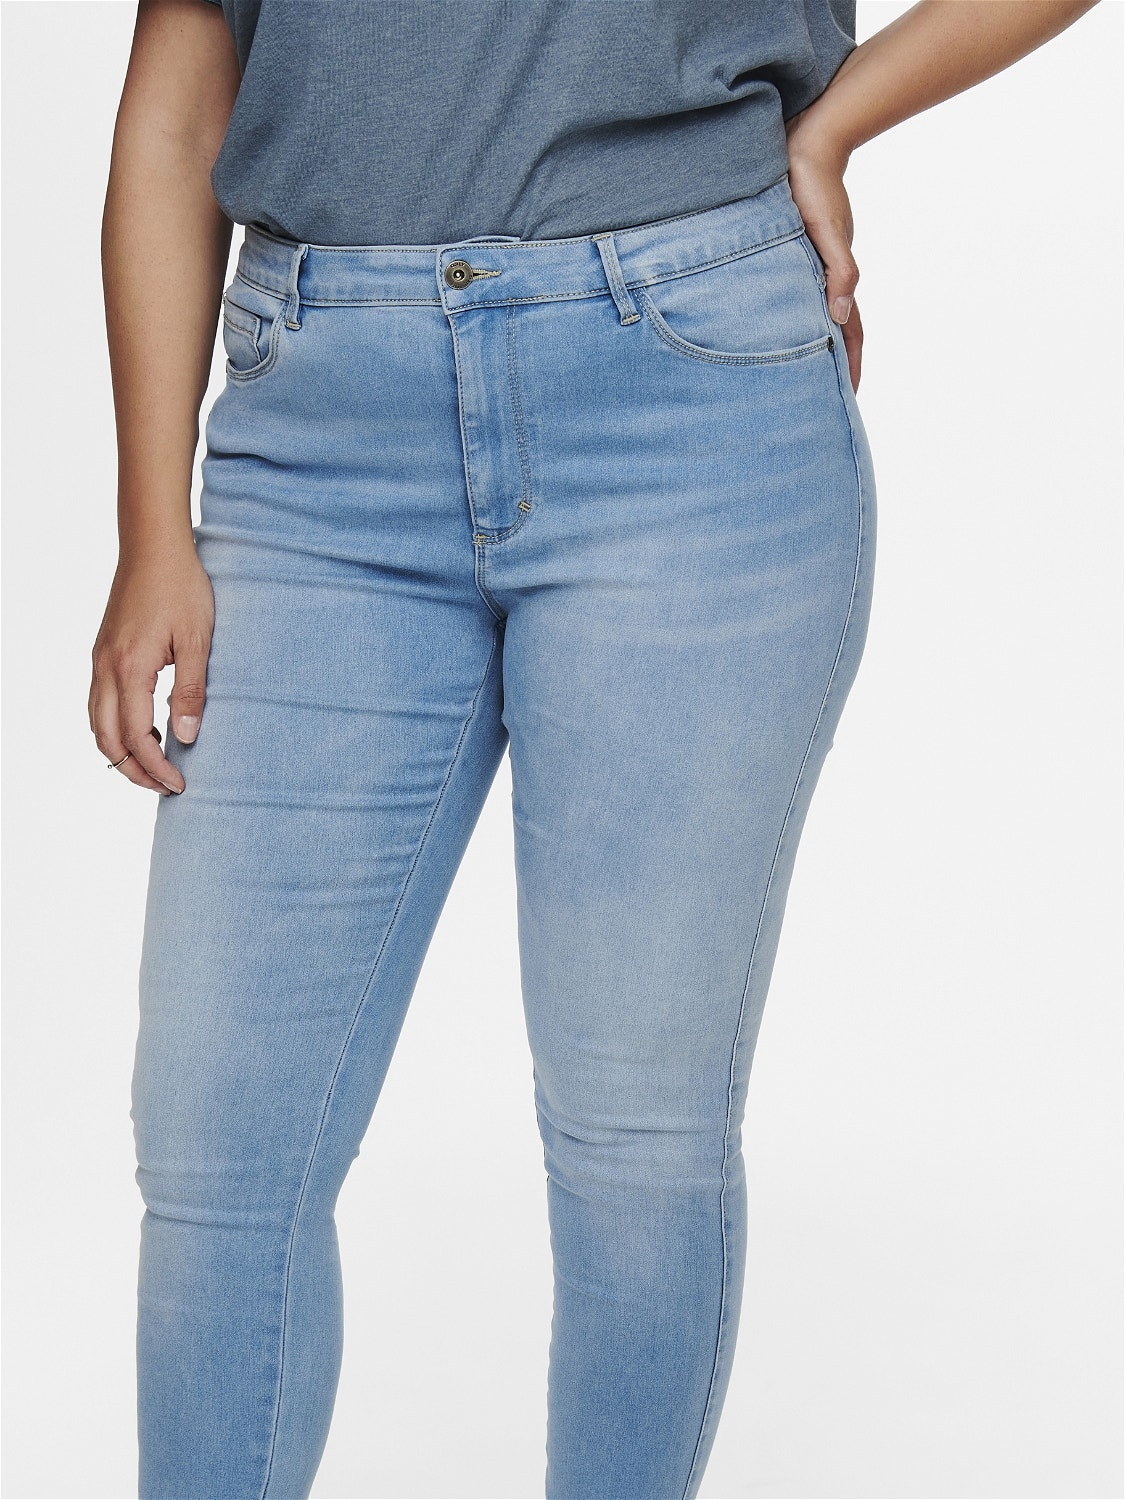 ONLY Skinny Fit Hohe Taille Jeans -Light Blue Denim - 15199400